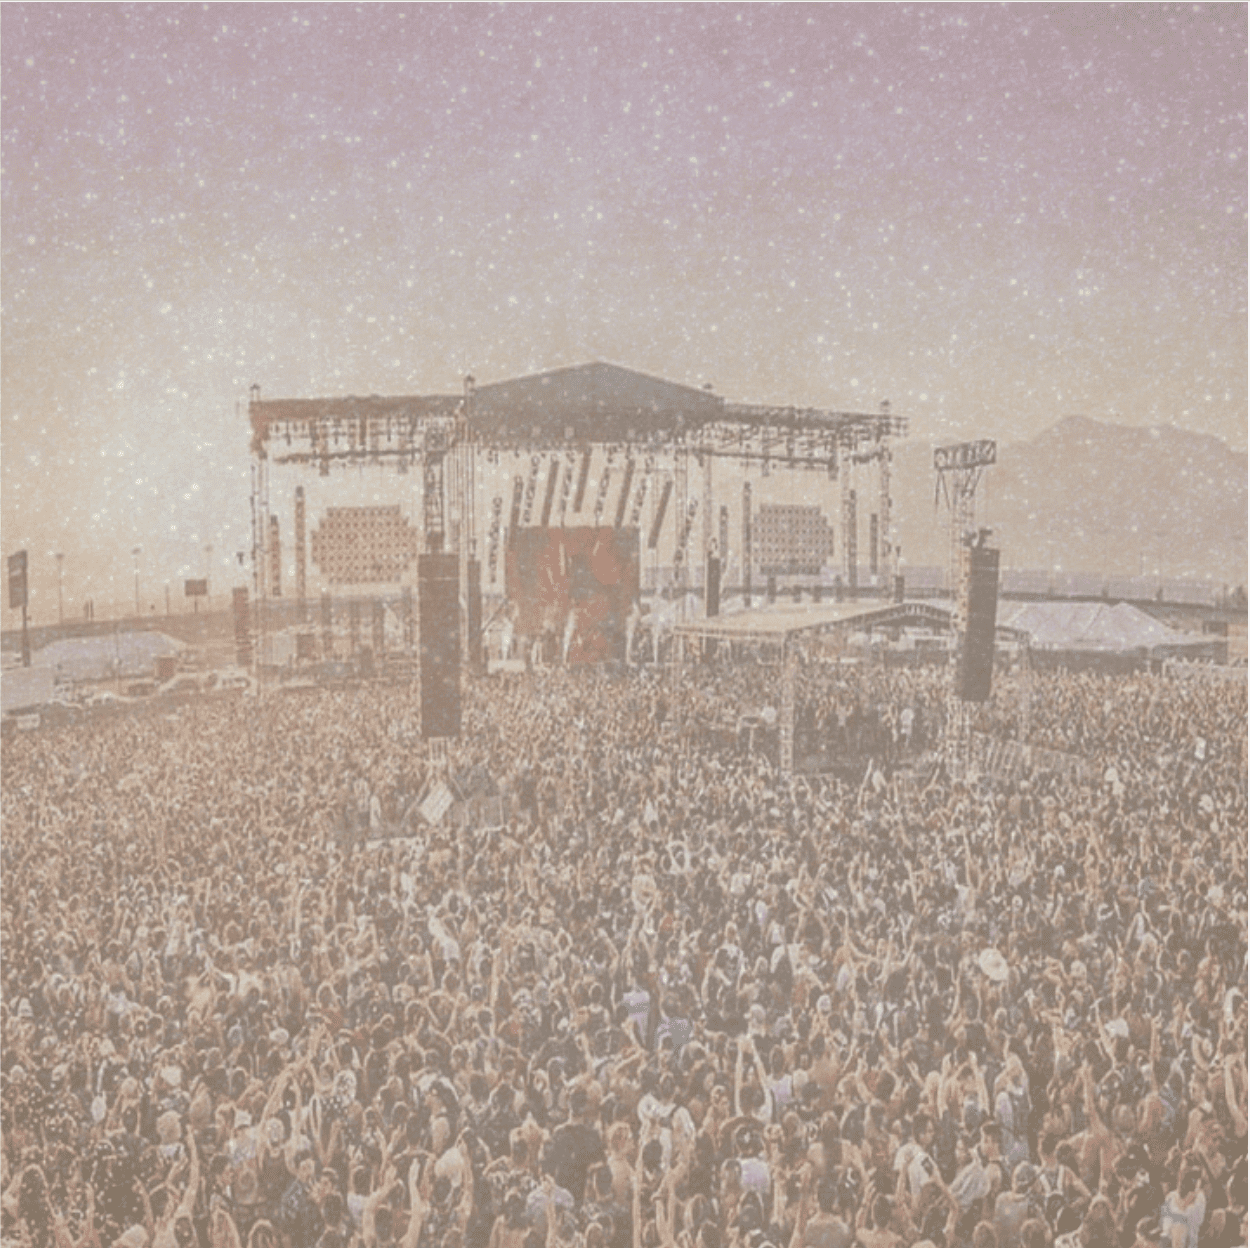 Photo of festival setting edited. Hazy image where yo can just barely see the people in the crowd. From the festival's website.